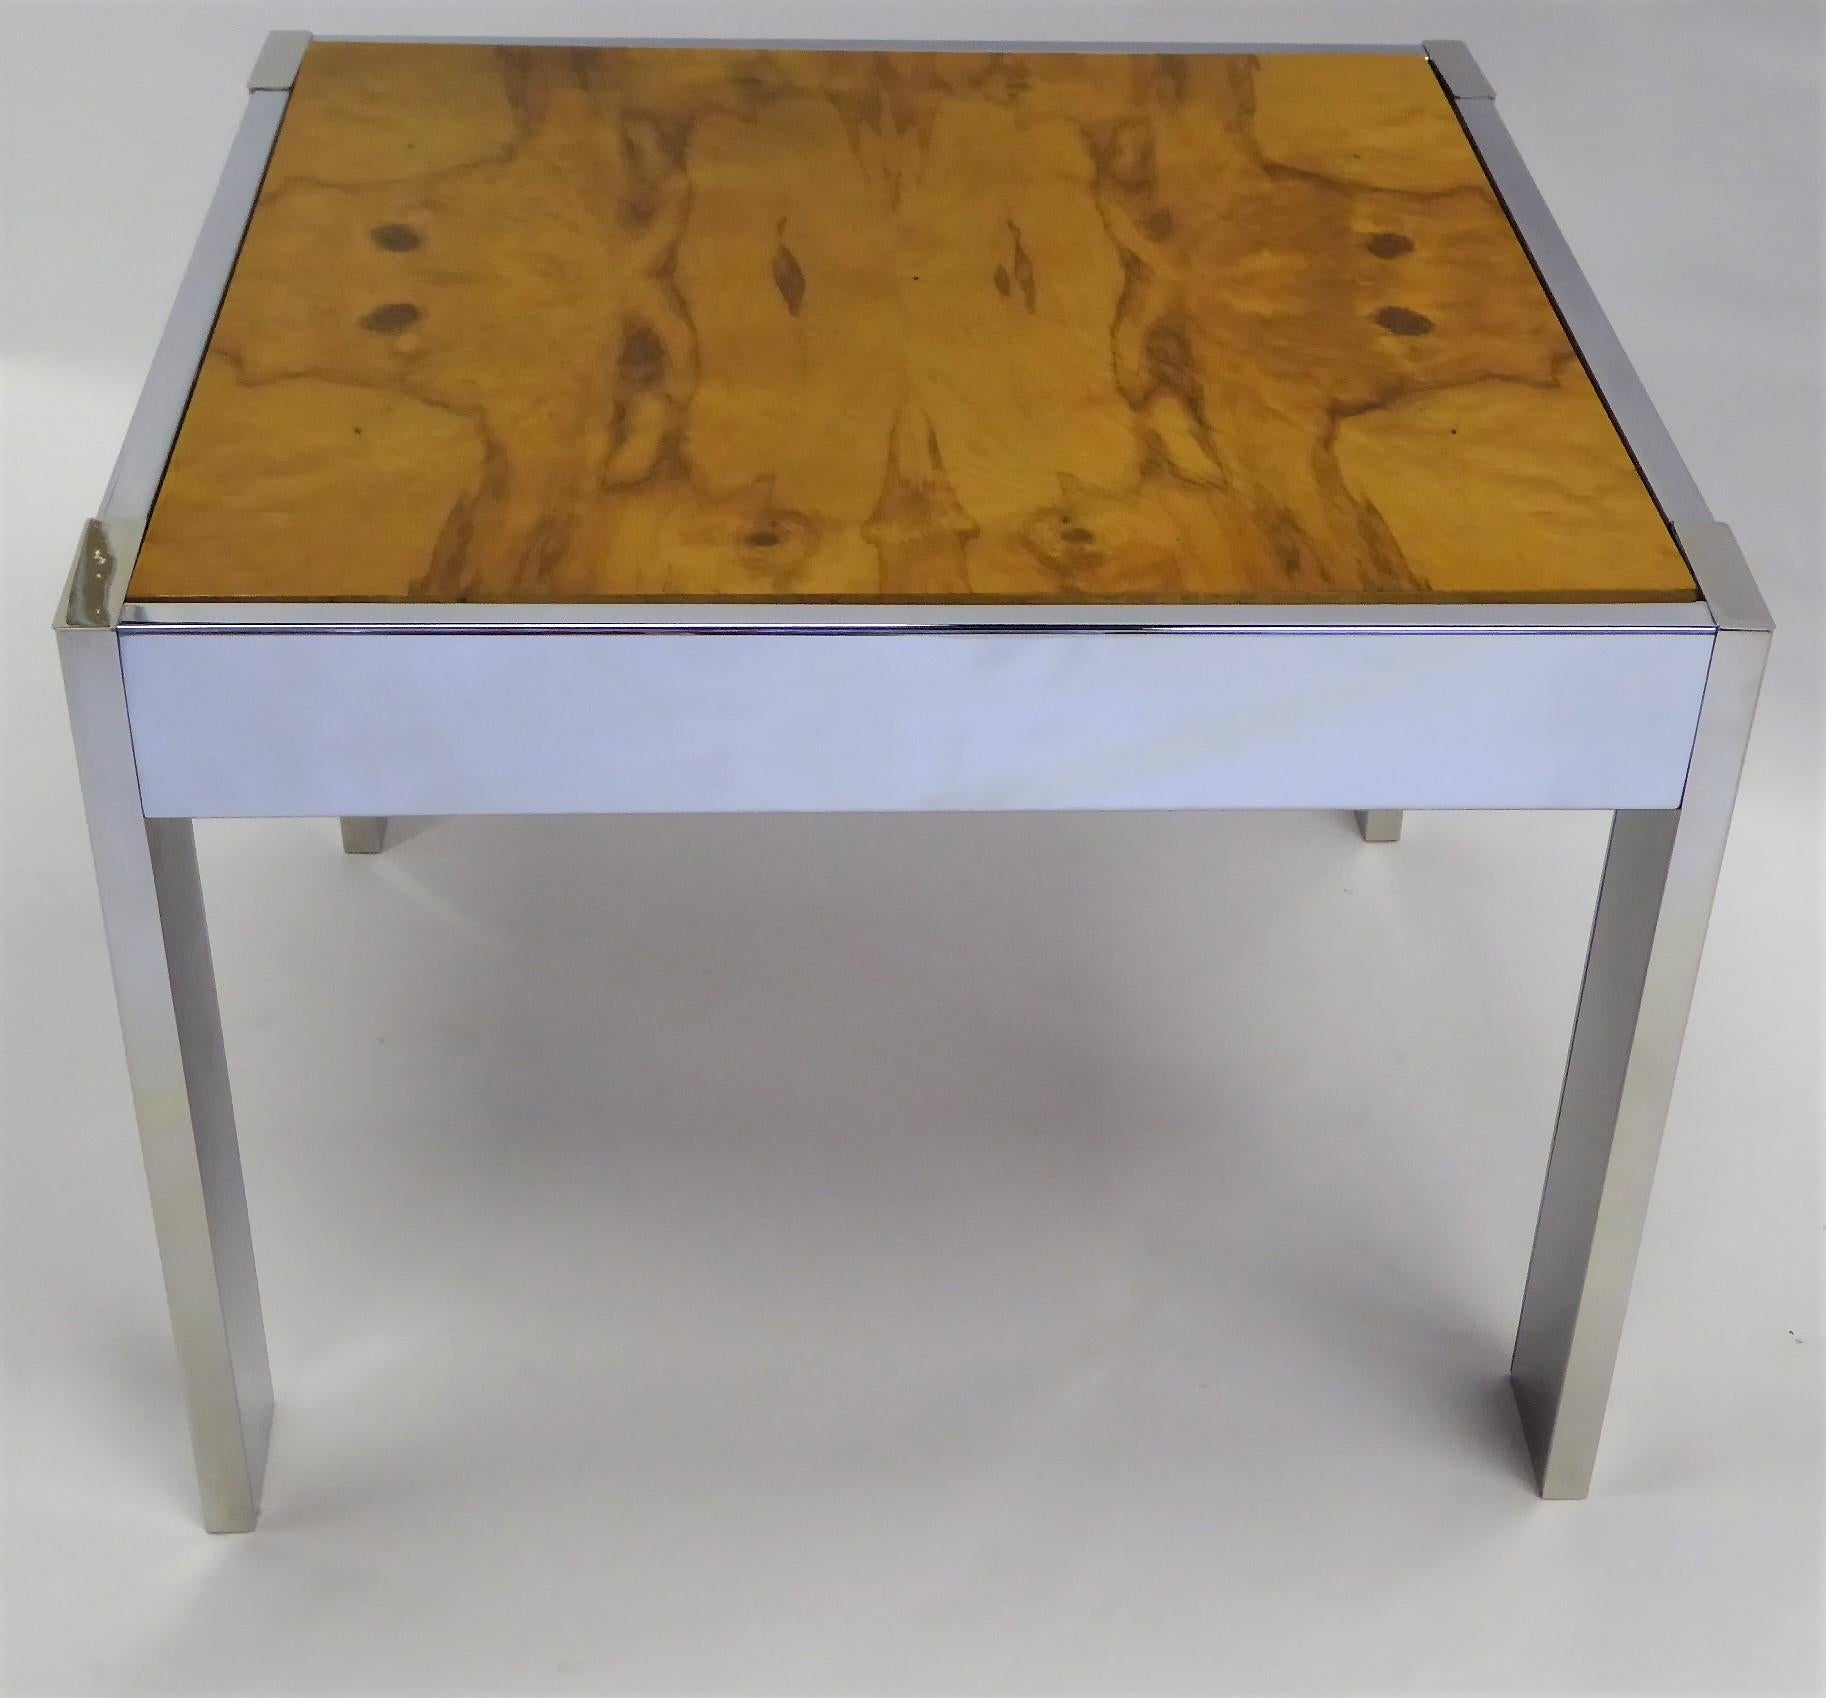 1970s chrome side table with an inset thick bookmatched blond burl veneer top in the style of Milo Baughman. Crafted in Mexico, the top has a clear coat finish and the chrome a mirror polish.
Measurements: 30 1/8 inches x 30 1/4 inches top x 22